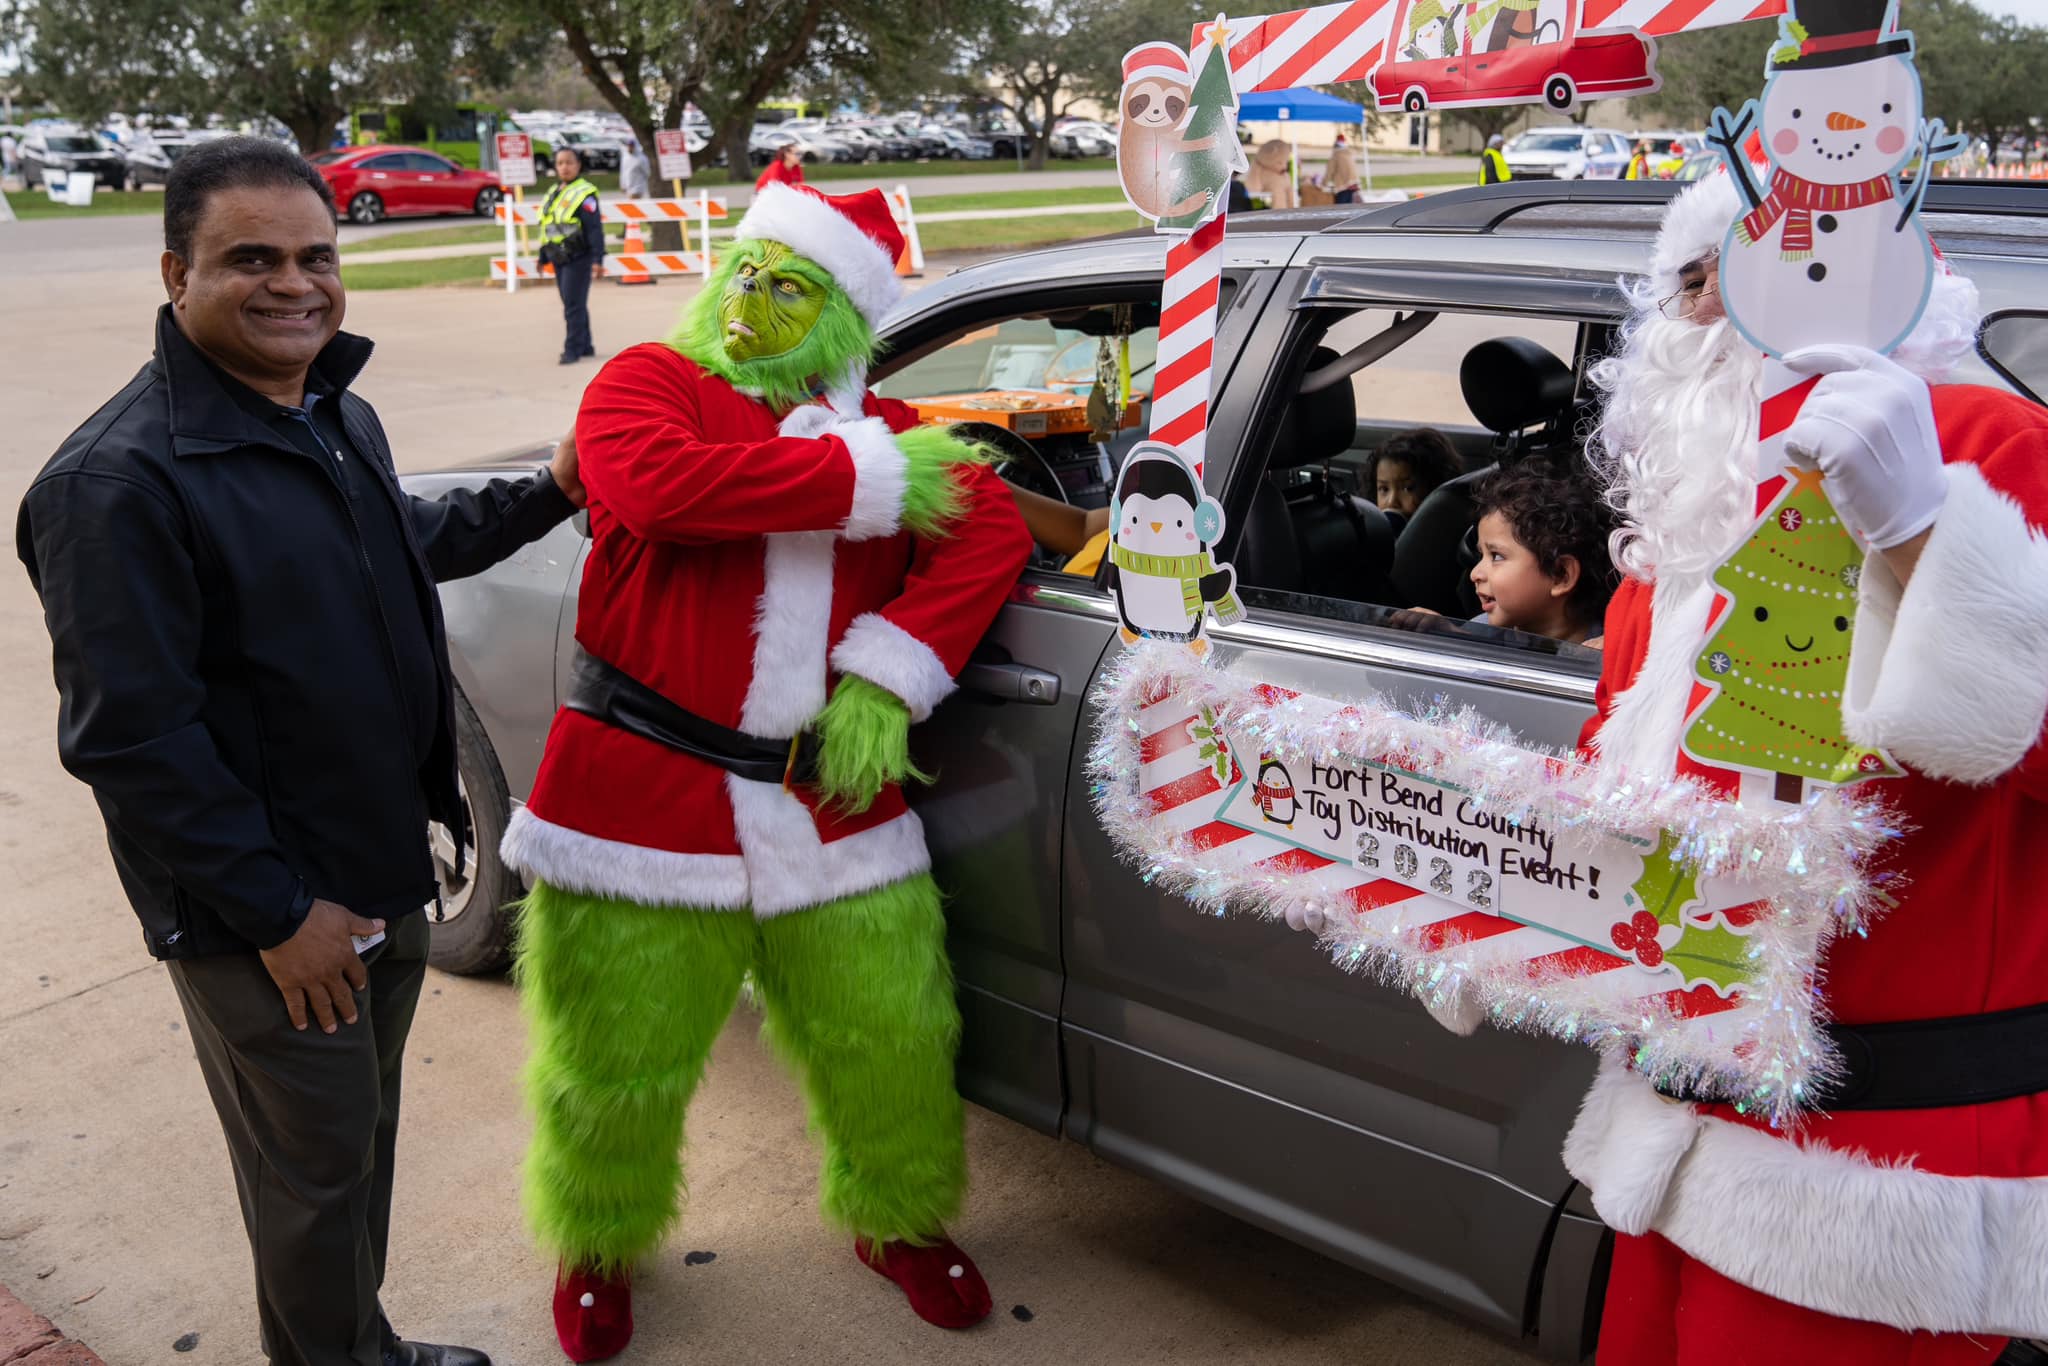 Fort Bend County Judge's Office to Host Third Annual Community Toy Drive